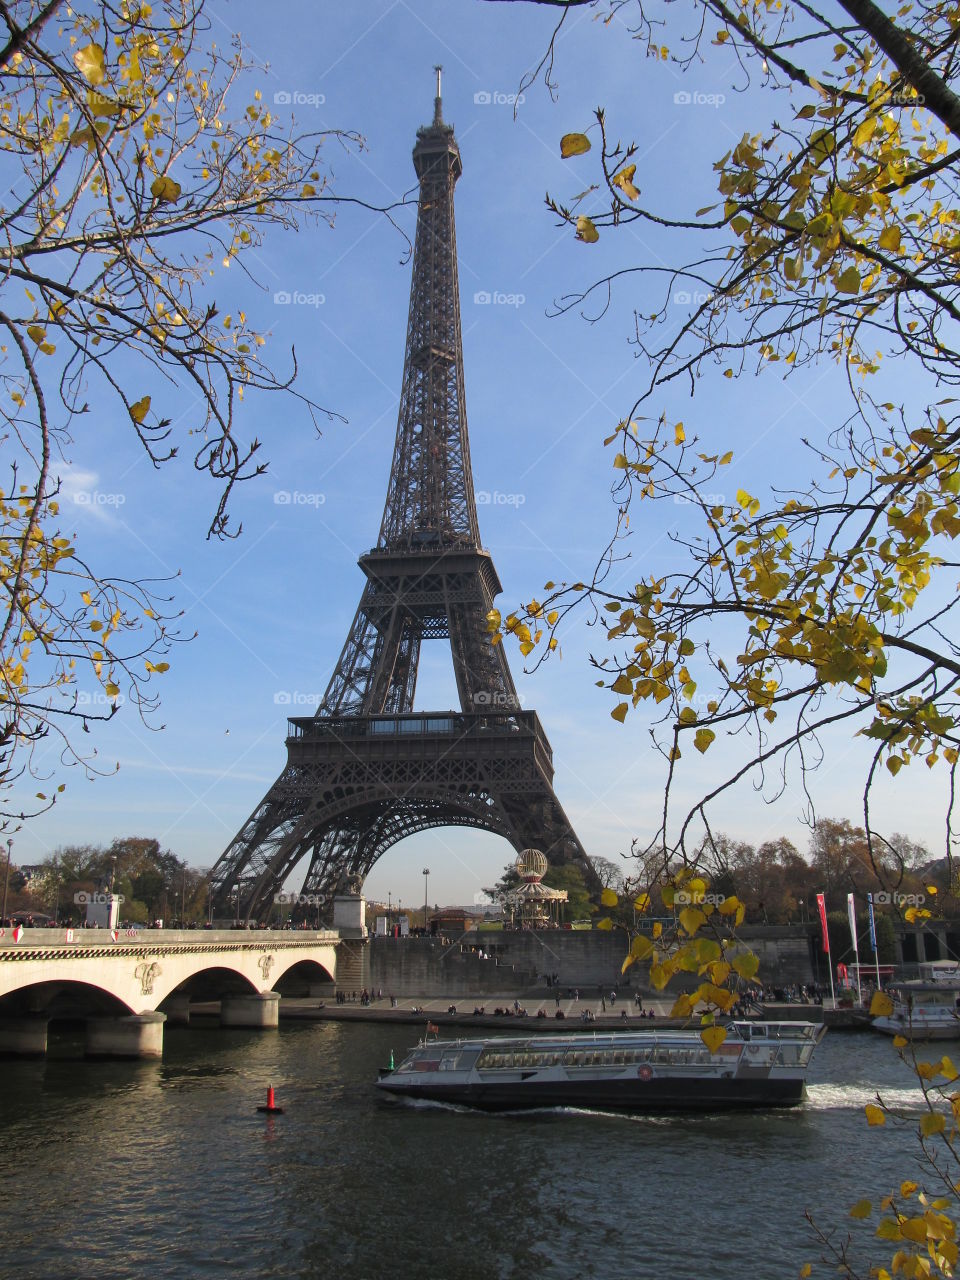 Eiffel Tower and trees